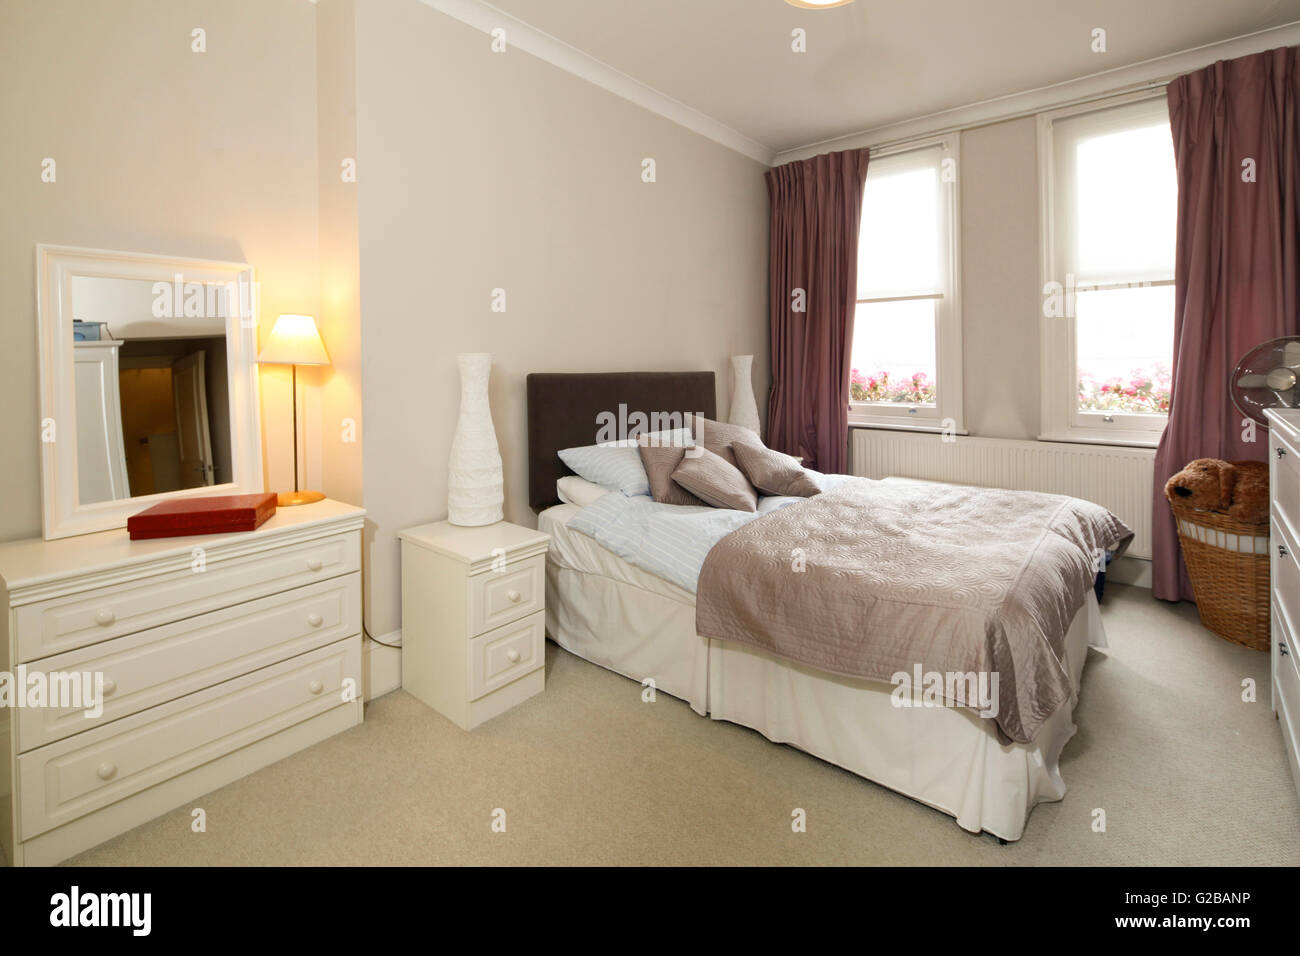 Walden House, Marylebone High Street. Bedroom with traditional, neutral toned furniture and large windows. Stock Photo